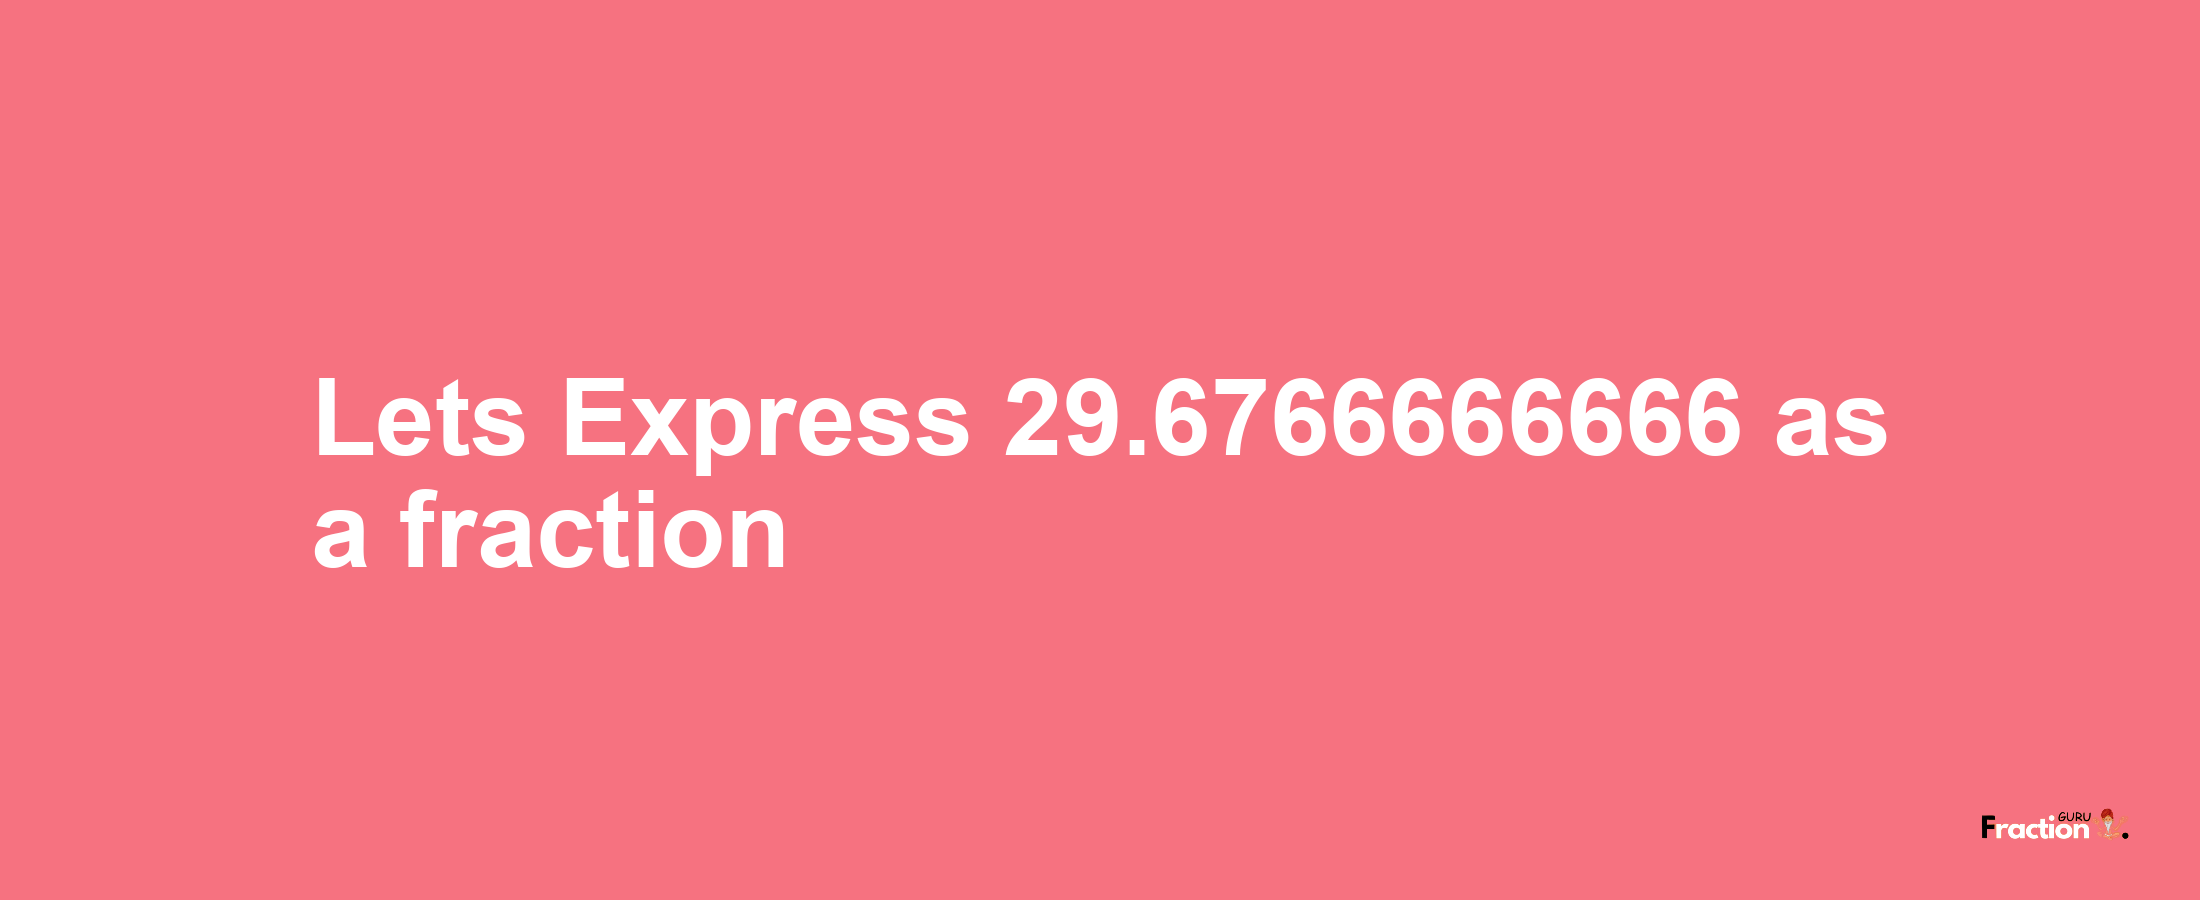 Lets Express 29.6766666666 as afraction